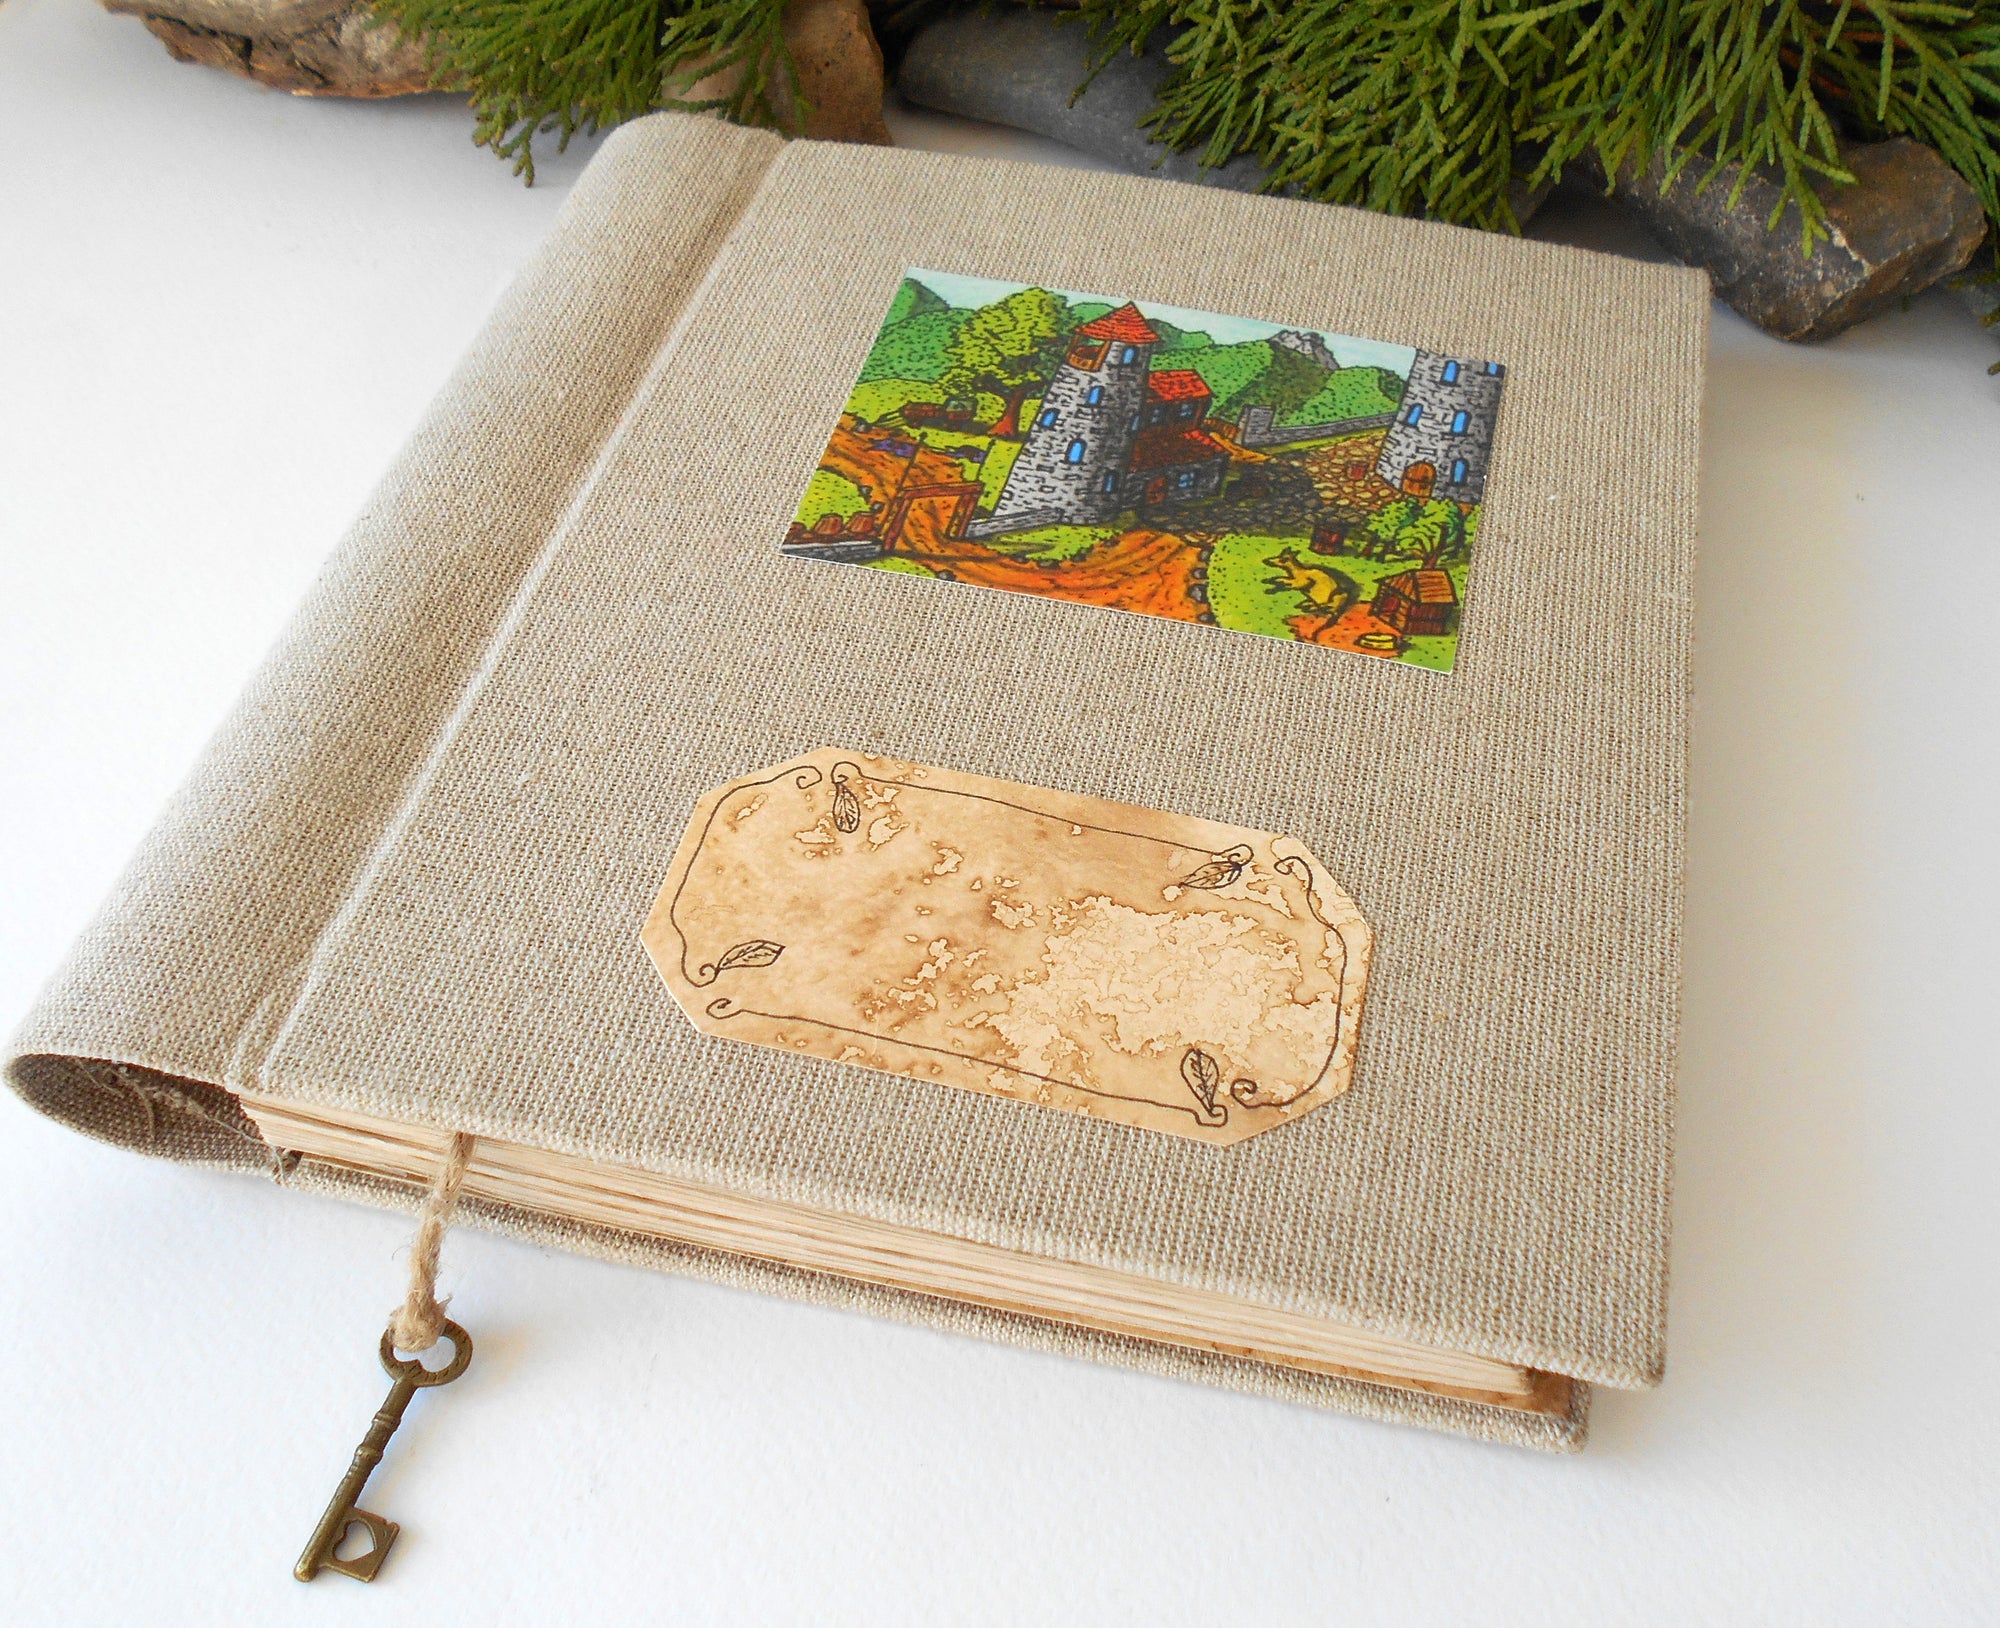 This is a unique inspirational personalized travel journal with hardcovers wrapped in a linen fabric covering. This refillable blank journal is made with 100% recycled page sheets in 80 gsm. paper which is 54 lbs thick. I have coffee-stained the pages so that they look old and vintage. 